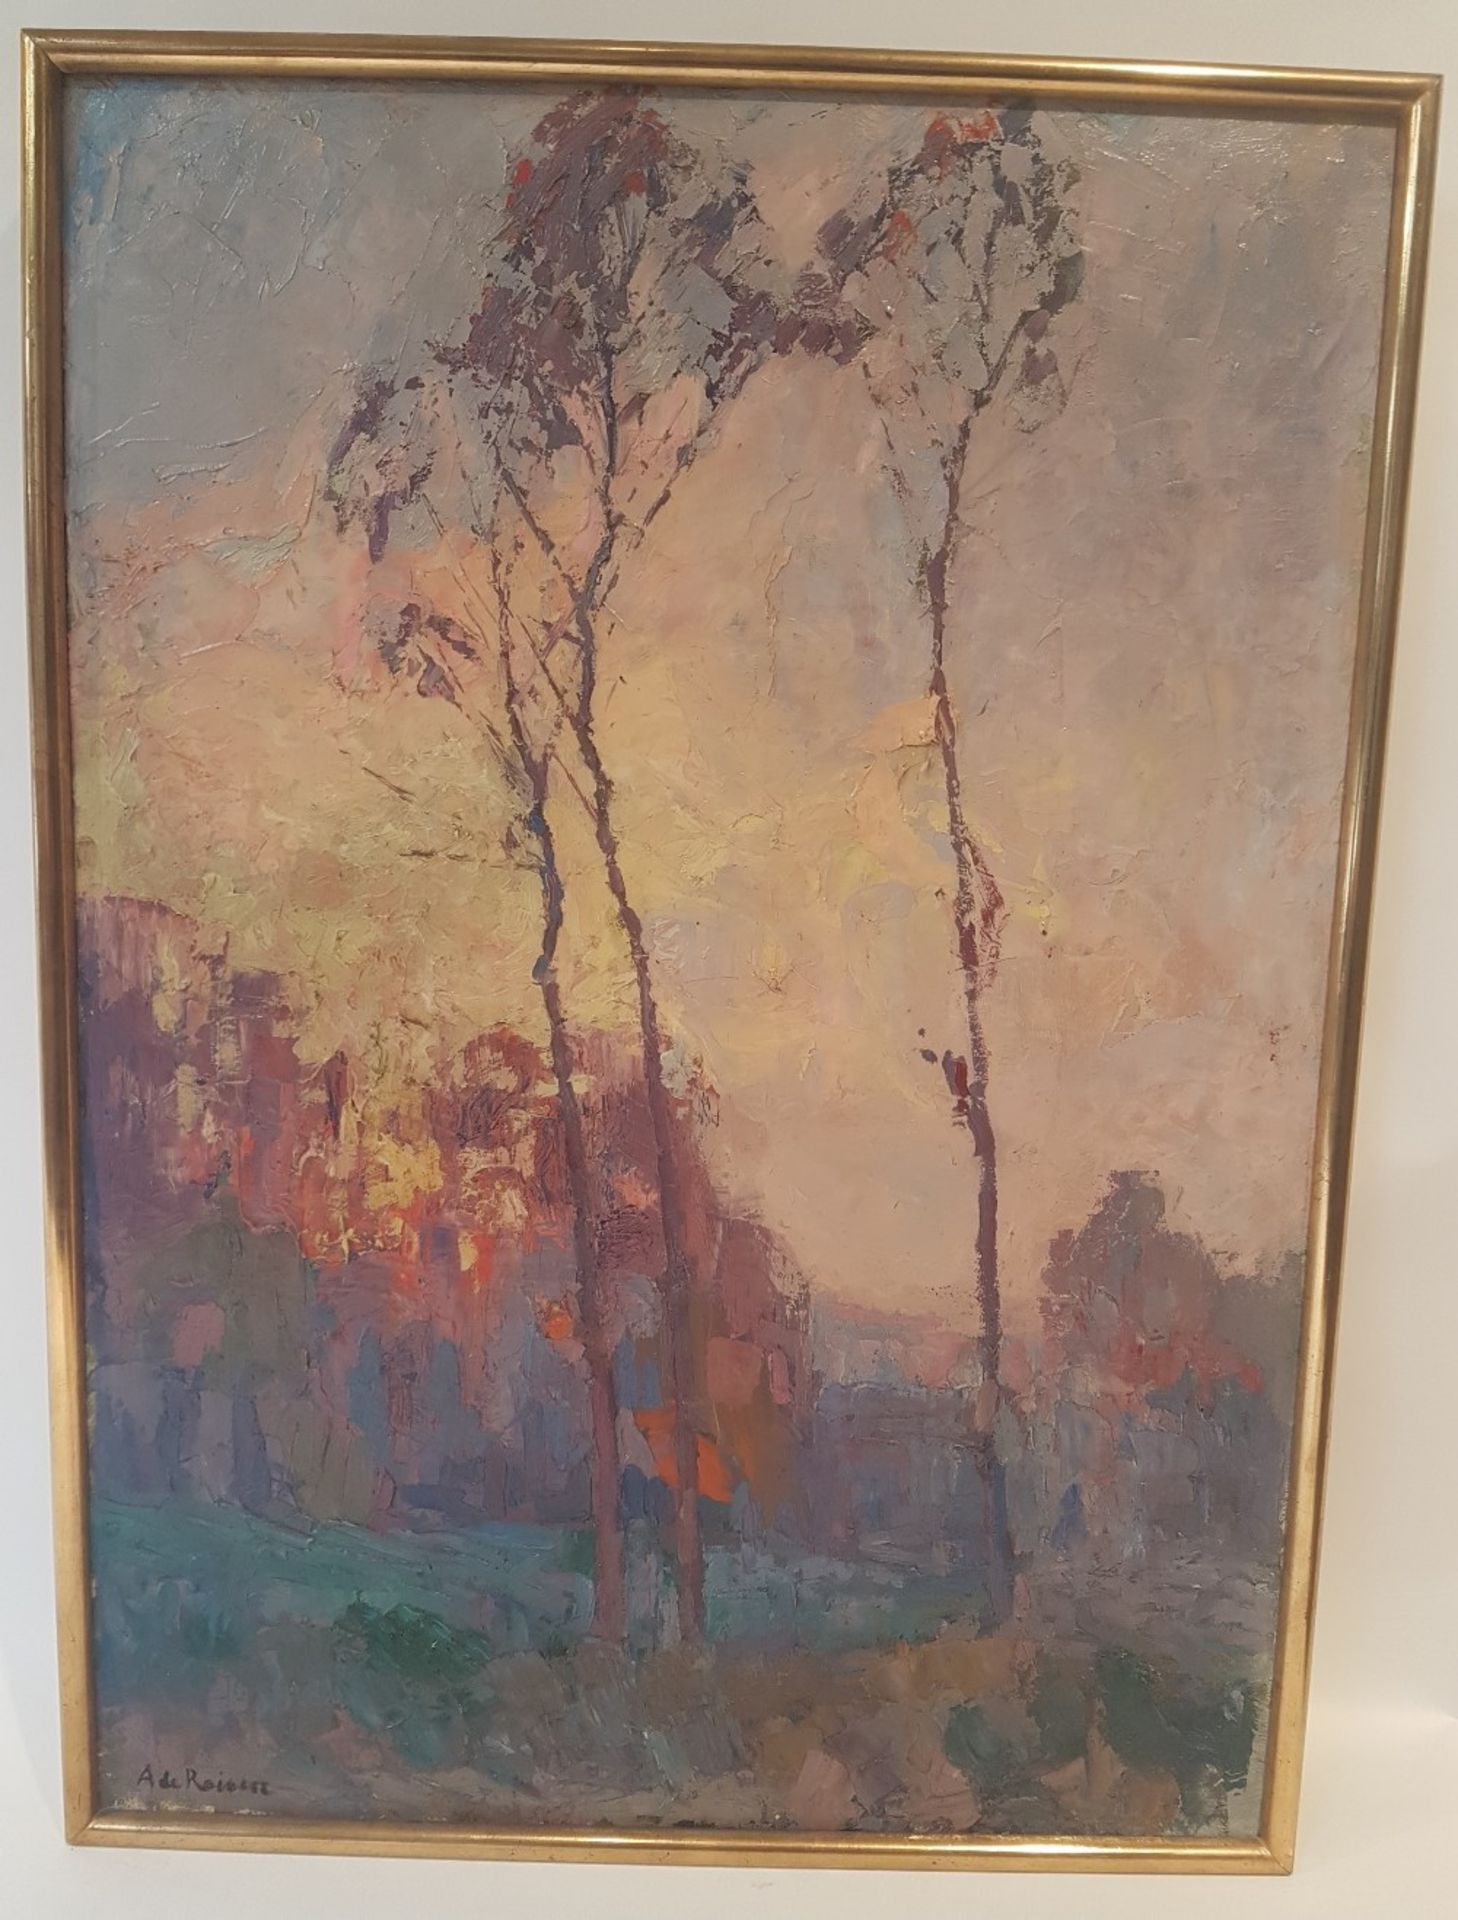 Auguste de Roisin (1889-?)Blazing sunset in the woods; Oil on canvas. Signed at lower left. 76 x